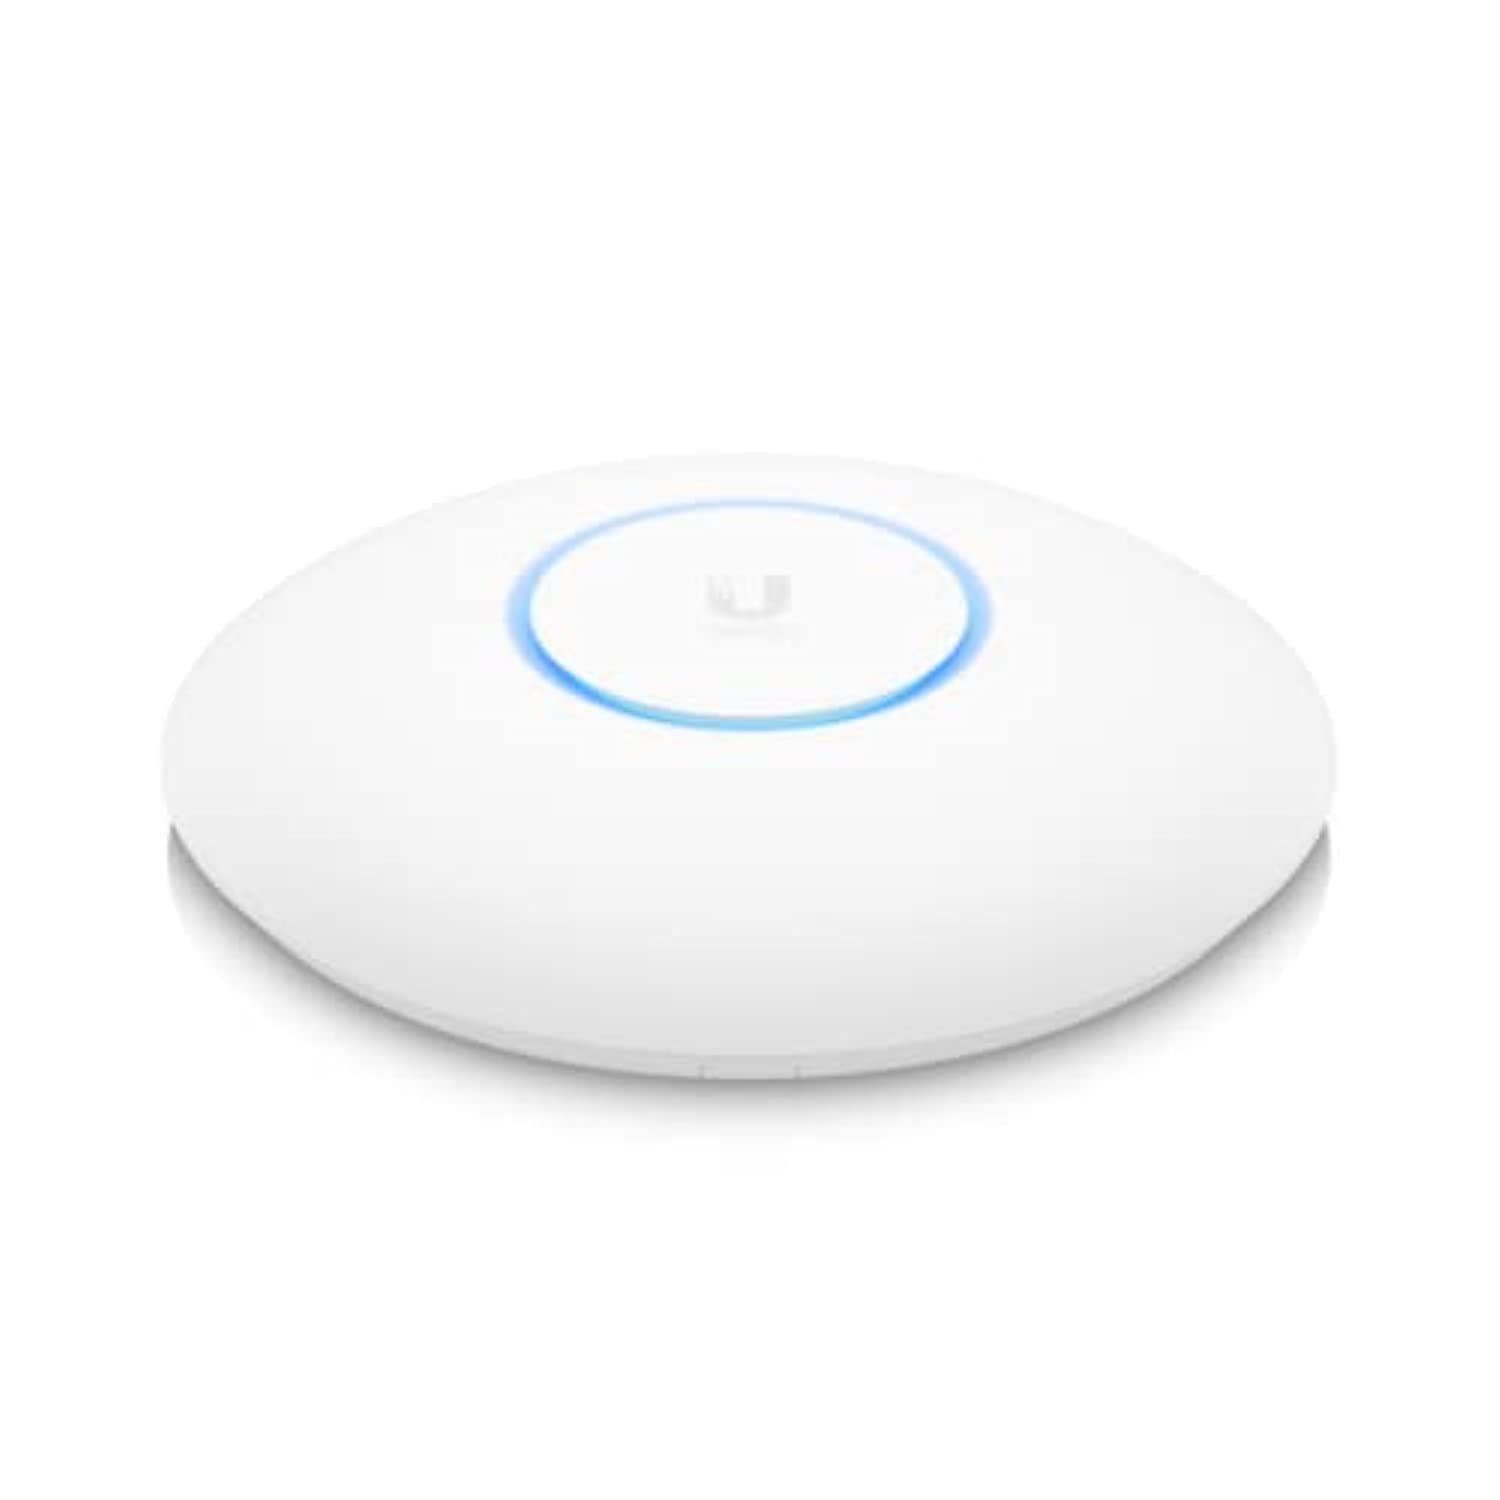 Ubiquiti Unifi U6-PRO WIFI 6 access point, POE, 1 X GbE RJ45 port, Managementinterfaces: Ethernet, Bluetooth, 802.3at PoE+, Throughput rate: 2.4 GHz-573.5Mbps, 5 GHz- 4.8 Gbps, WiFi standards: 802.11a/b/g, WiFi 4/WiFi 5/WiFi 6, Concurrent clients: 300+._1